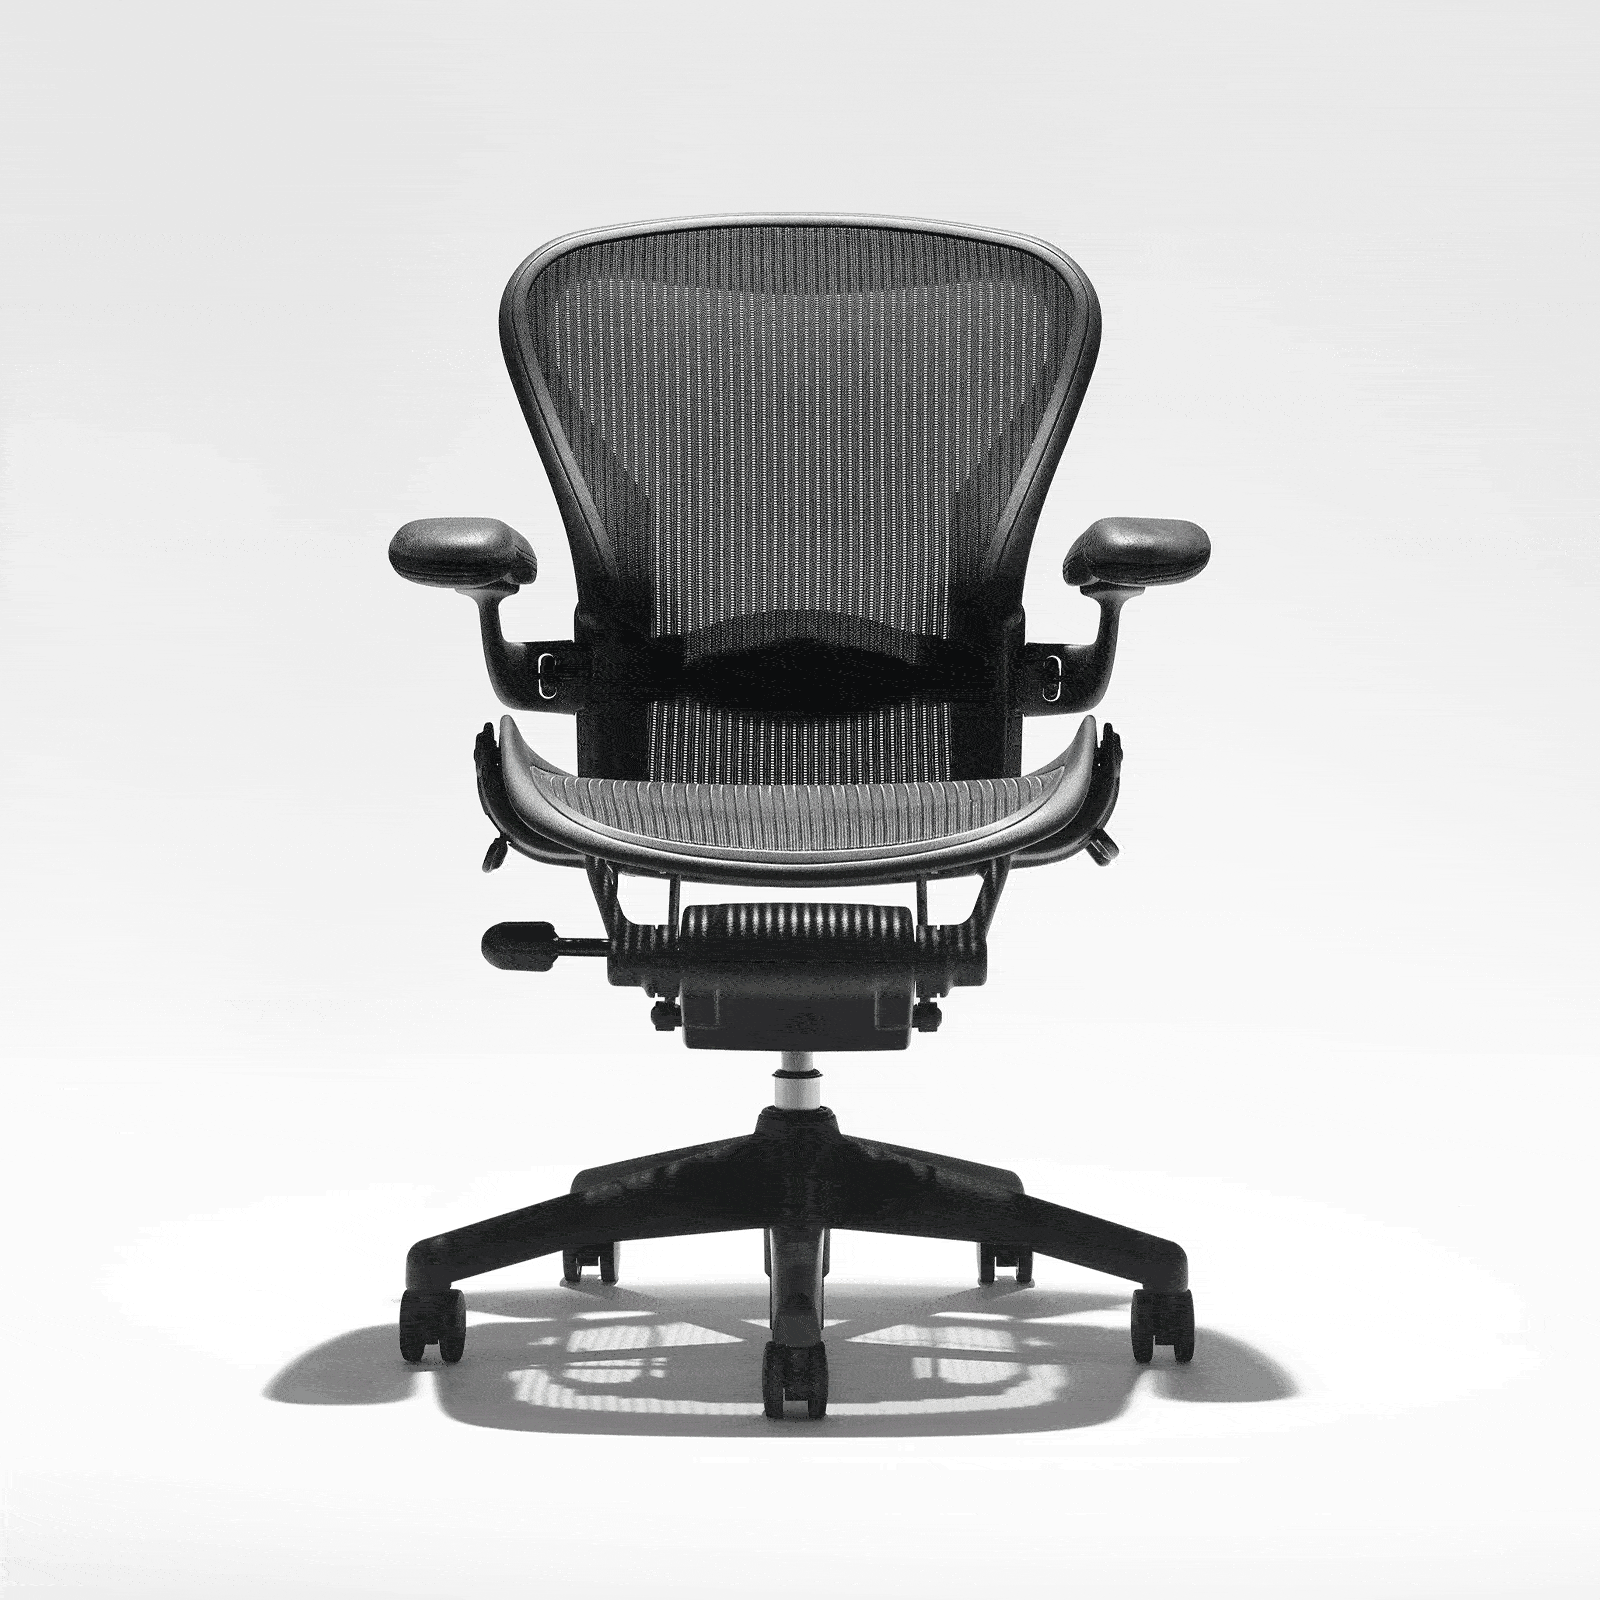 An animation showing different configurations of the Aeron Chair.